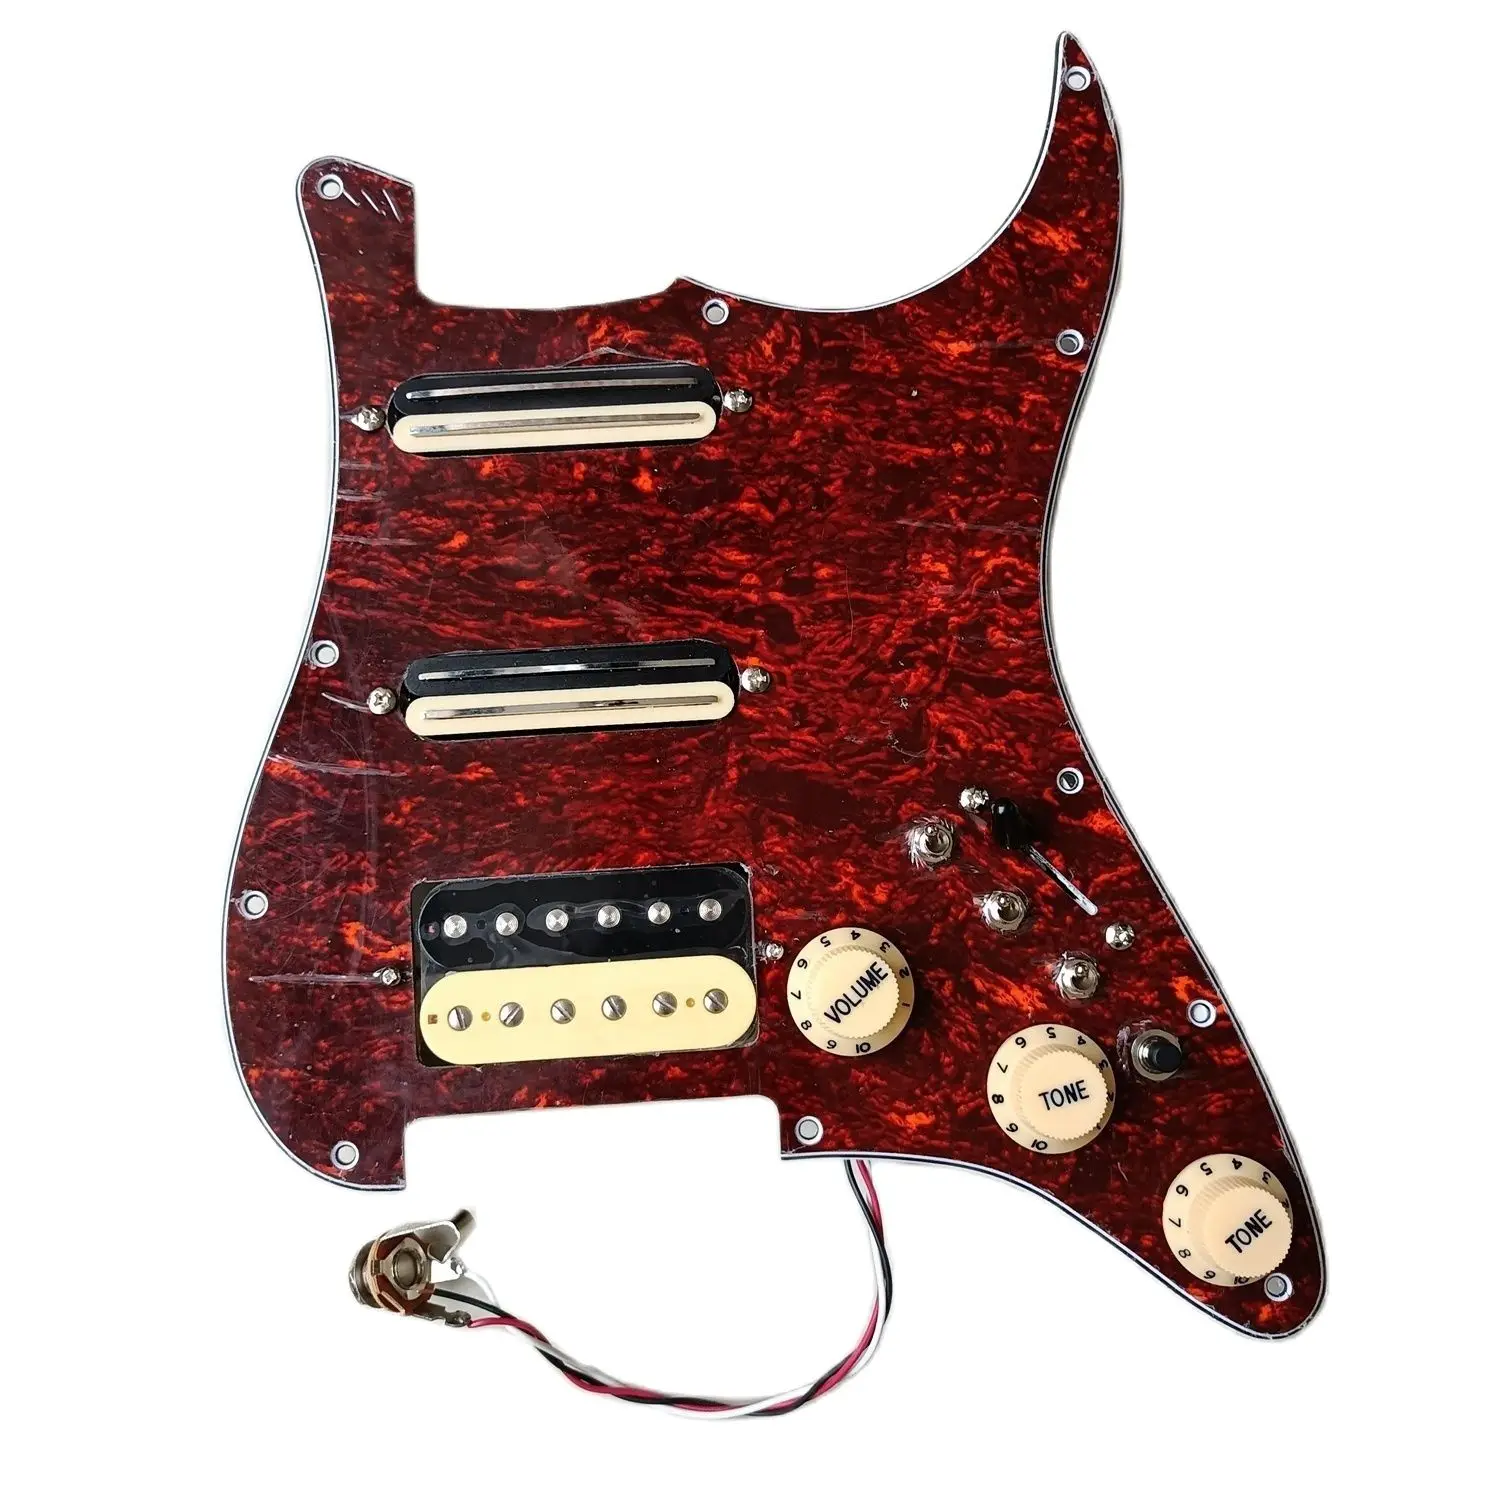 

SSH Prewired Loaded ST Pickguard Multifunction 7 Way Switch Dual Hot Rail High Output Zebra Pickups for FD Guitar Accessories